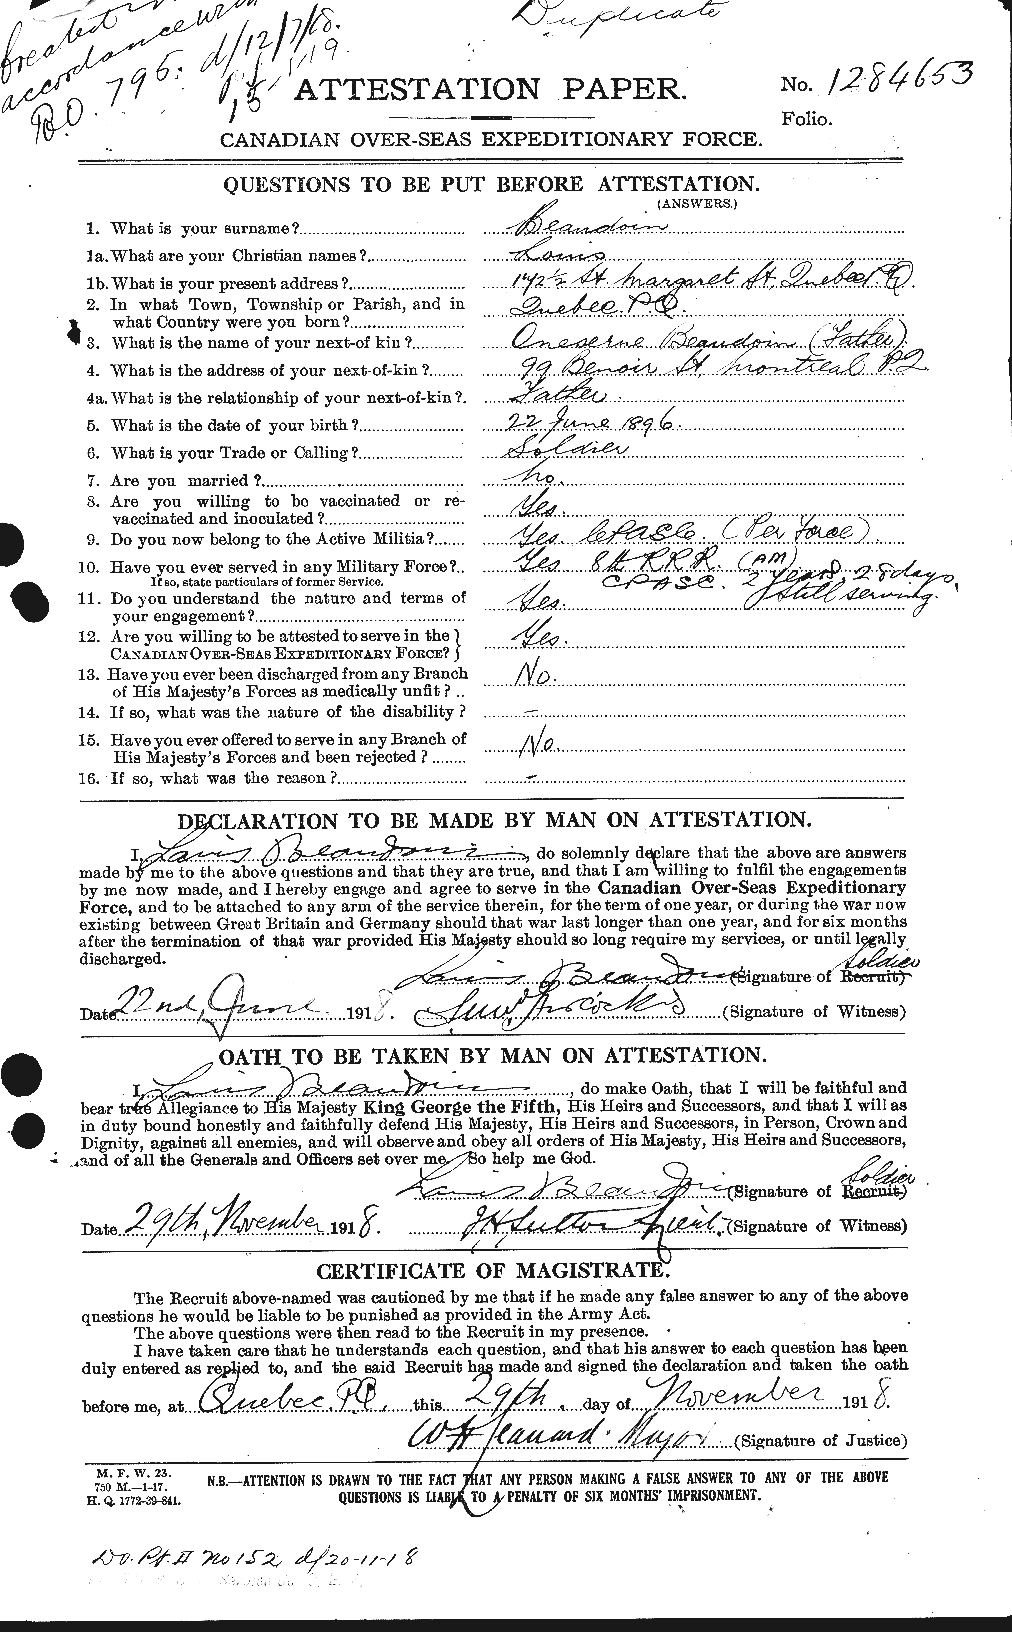 Personnel Records of the First World War - CEF 231271a